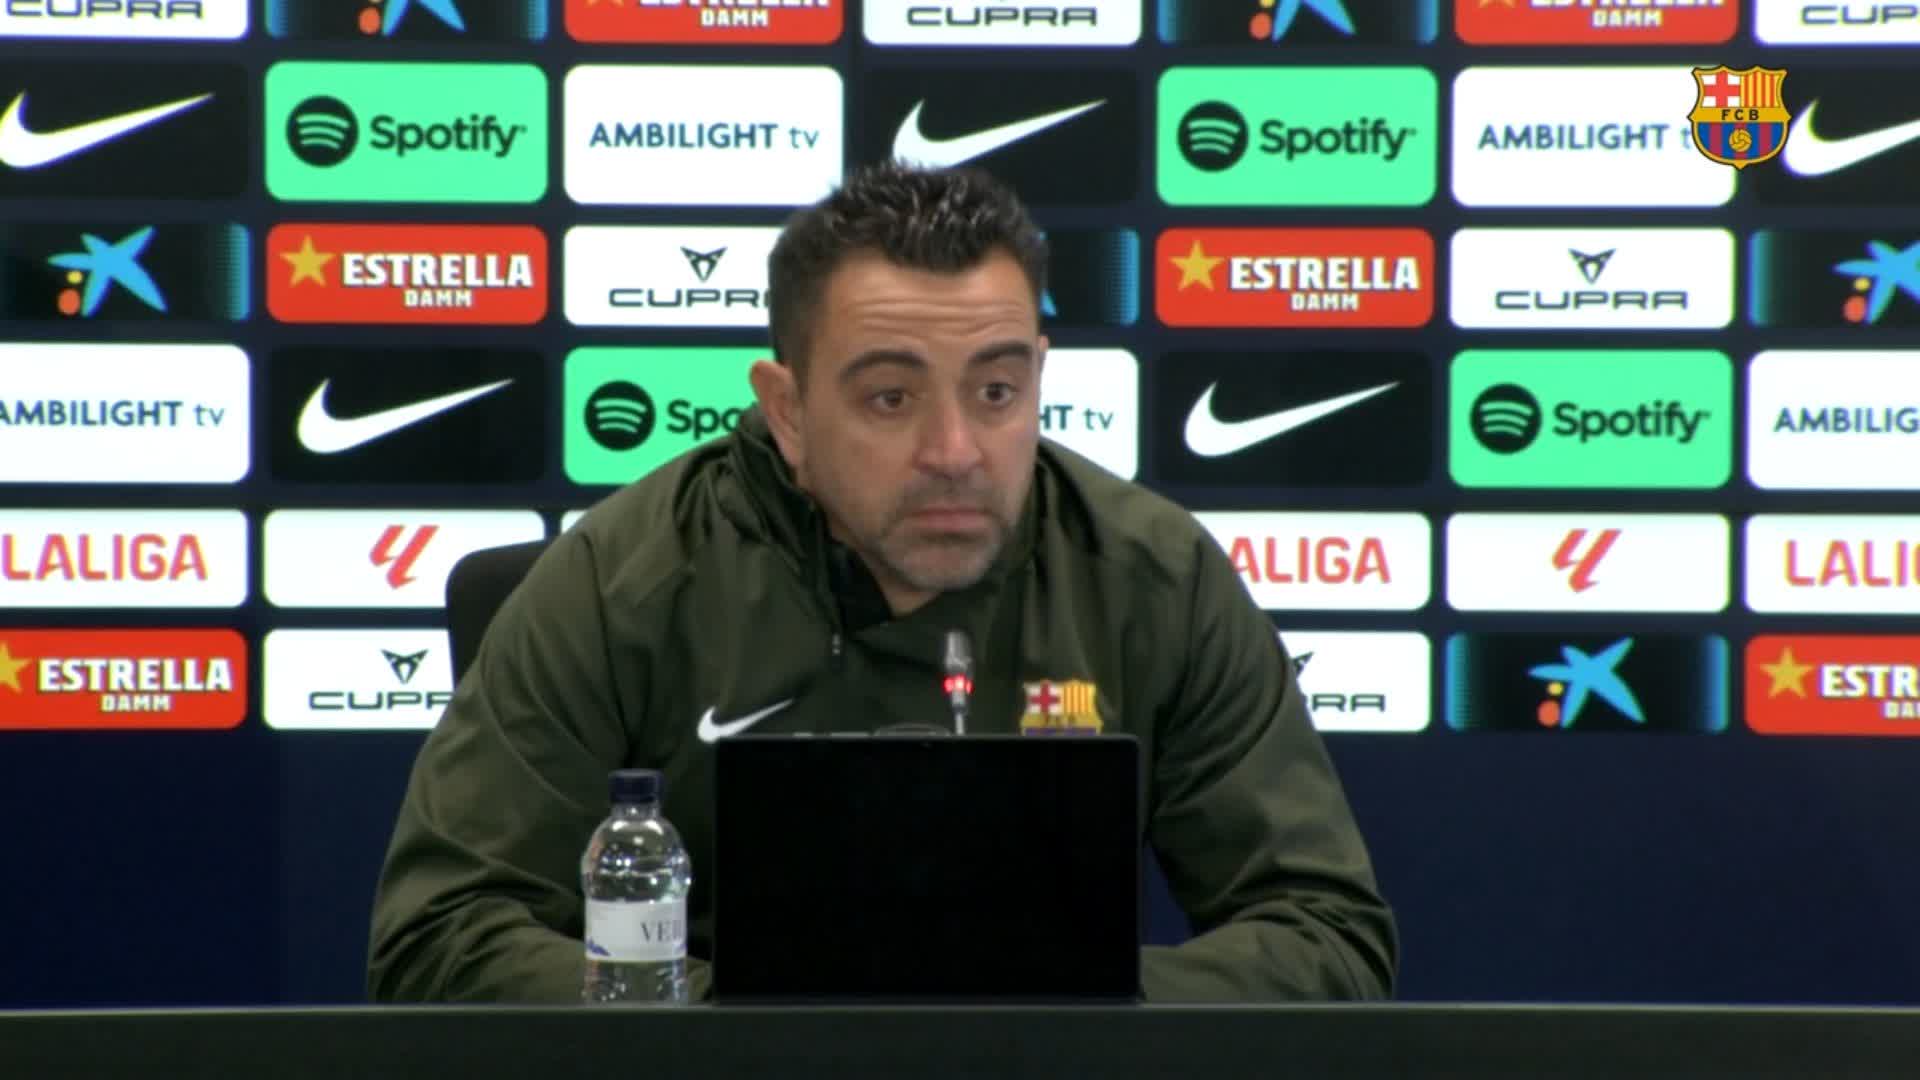 “I understand” – Xavi Hernandez reacts to speculation on impending Barcelona sacking